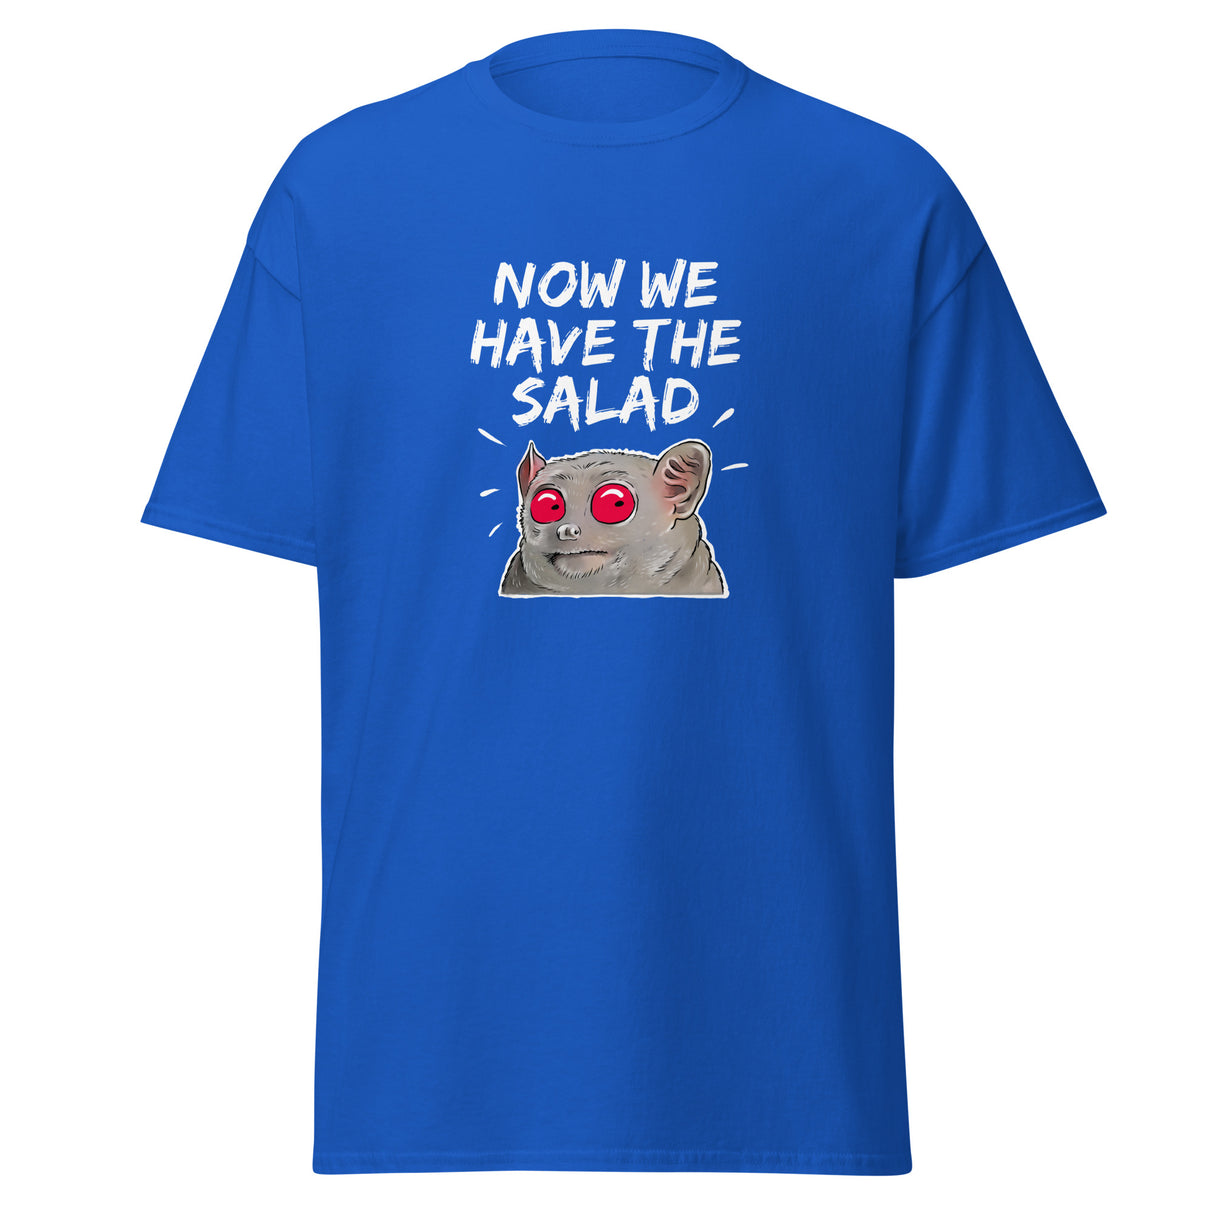 T-Shirt - Now we have the Salad